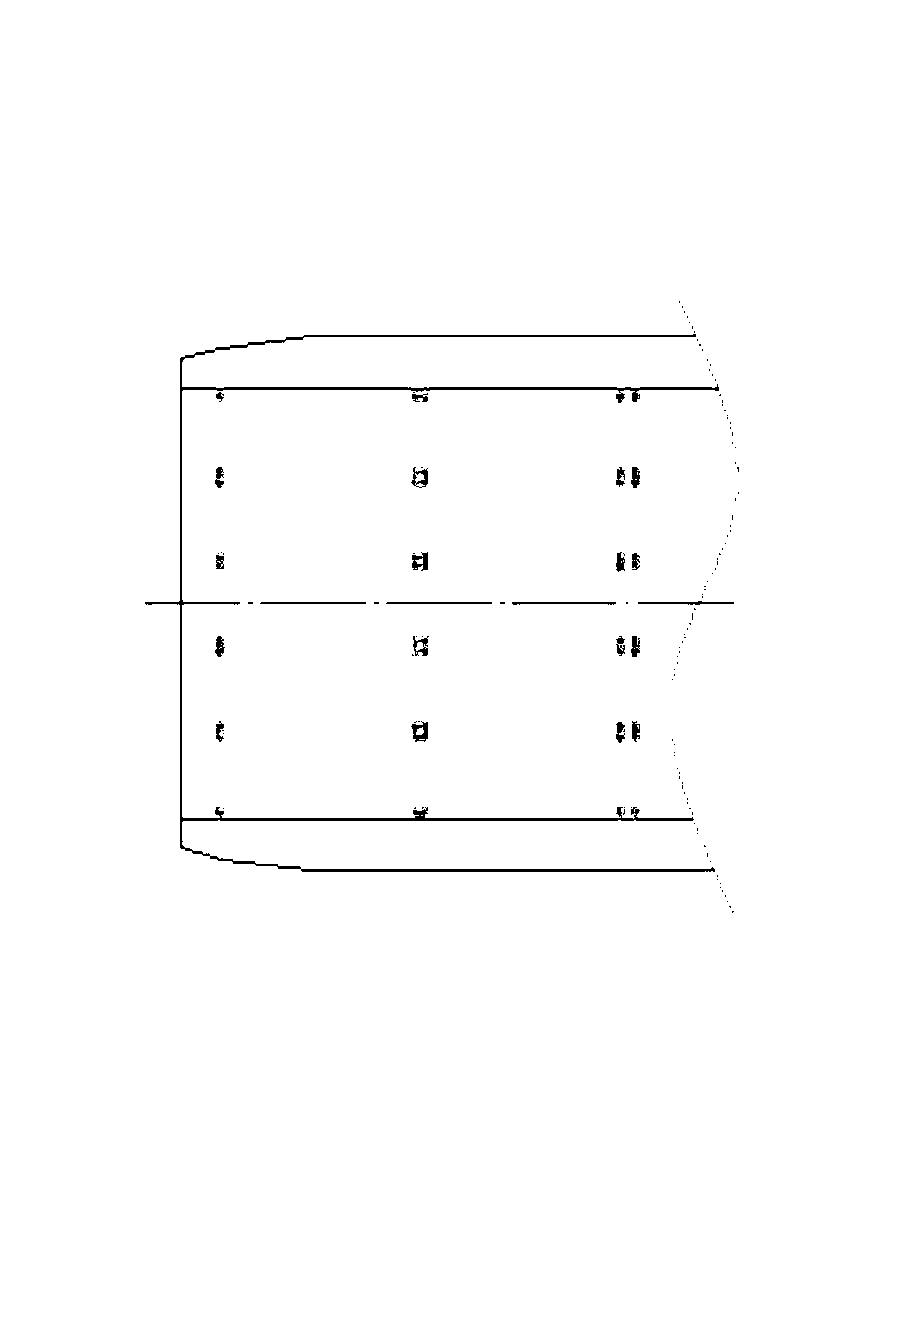 Method for mounting base of container